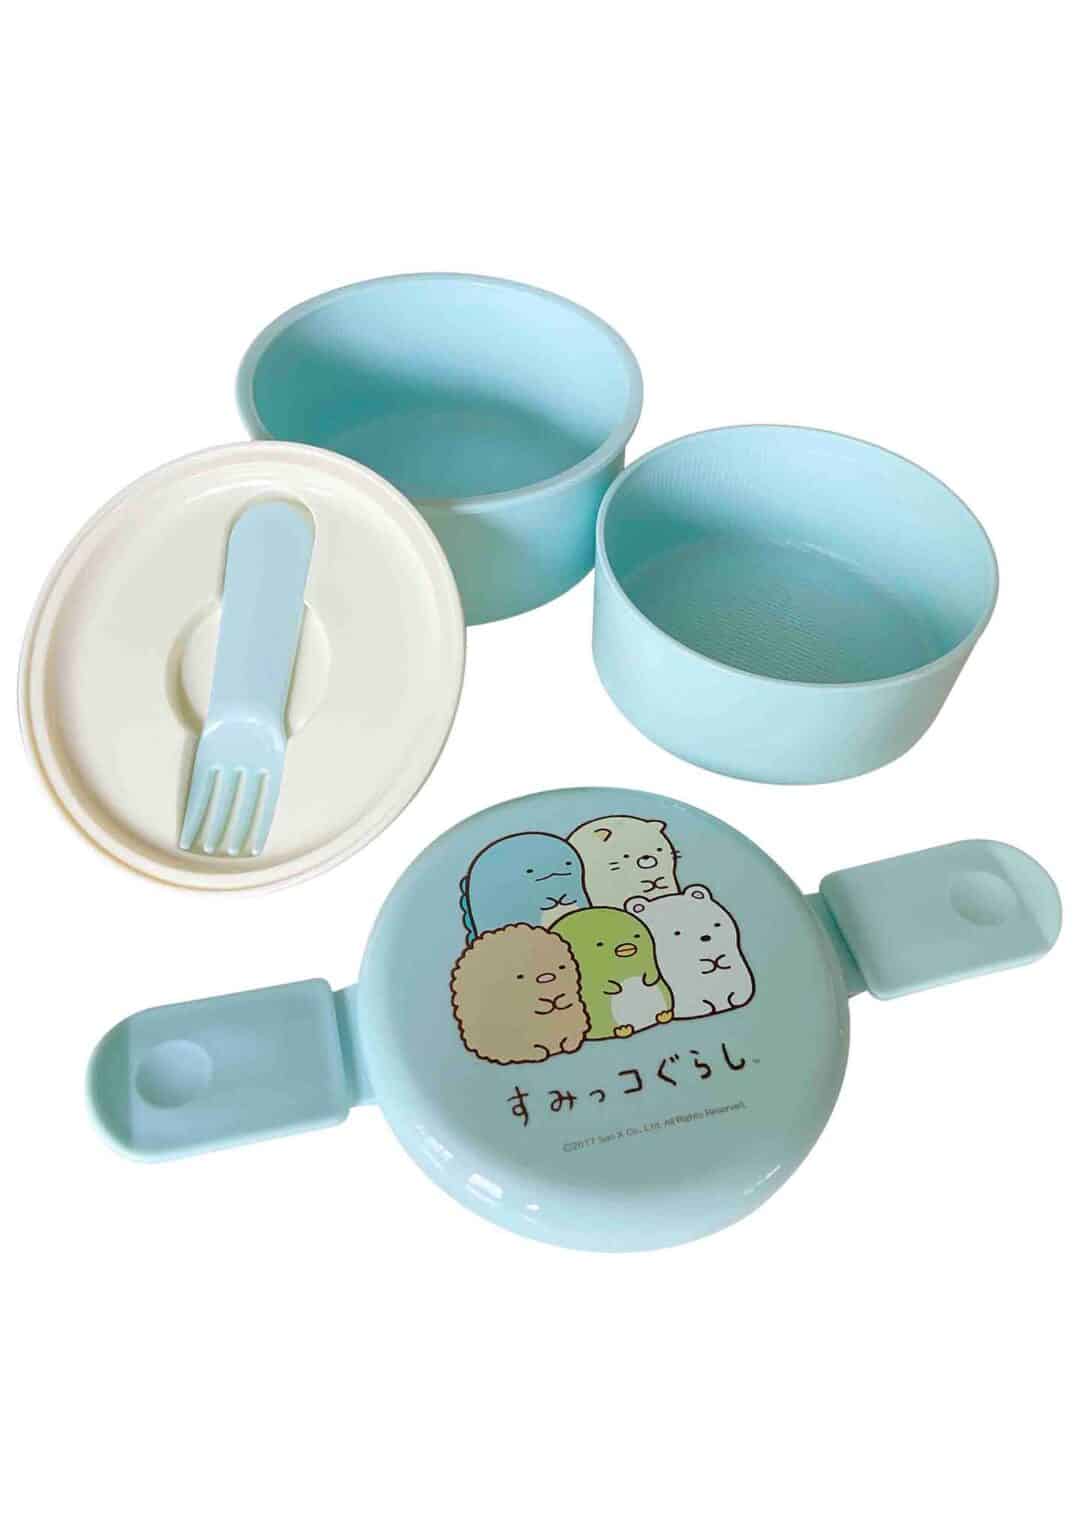 Clever Idiots Sumikko Gurashi Round Bento Lunch Box with Fork Blue Kawaii Gifts 4973307424212